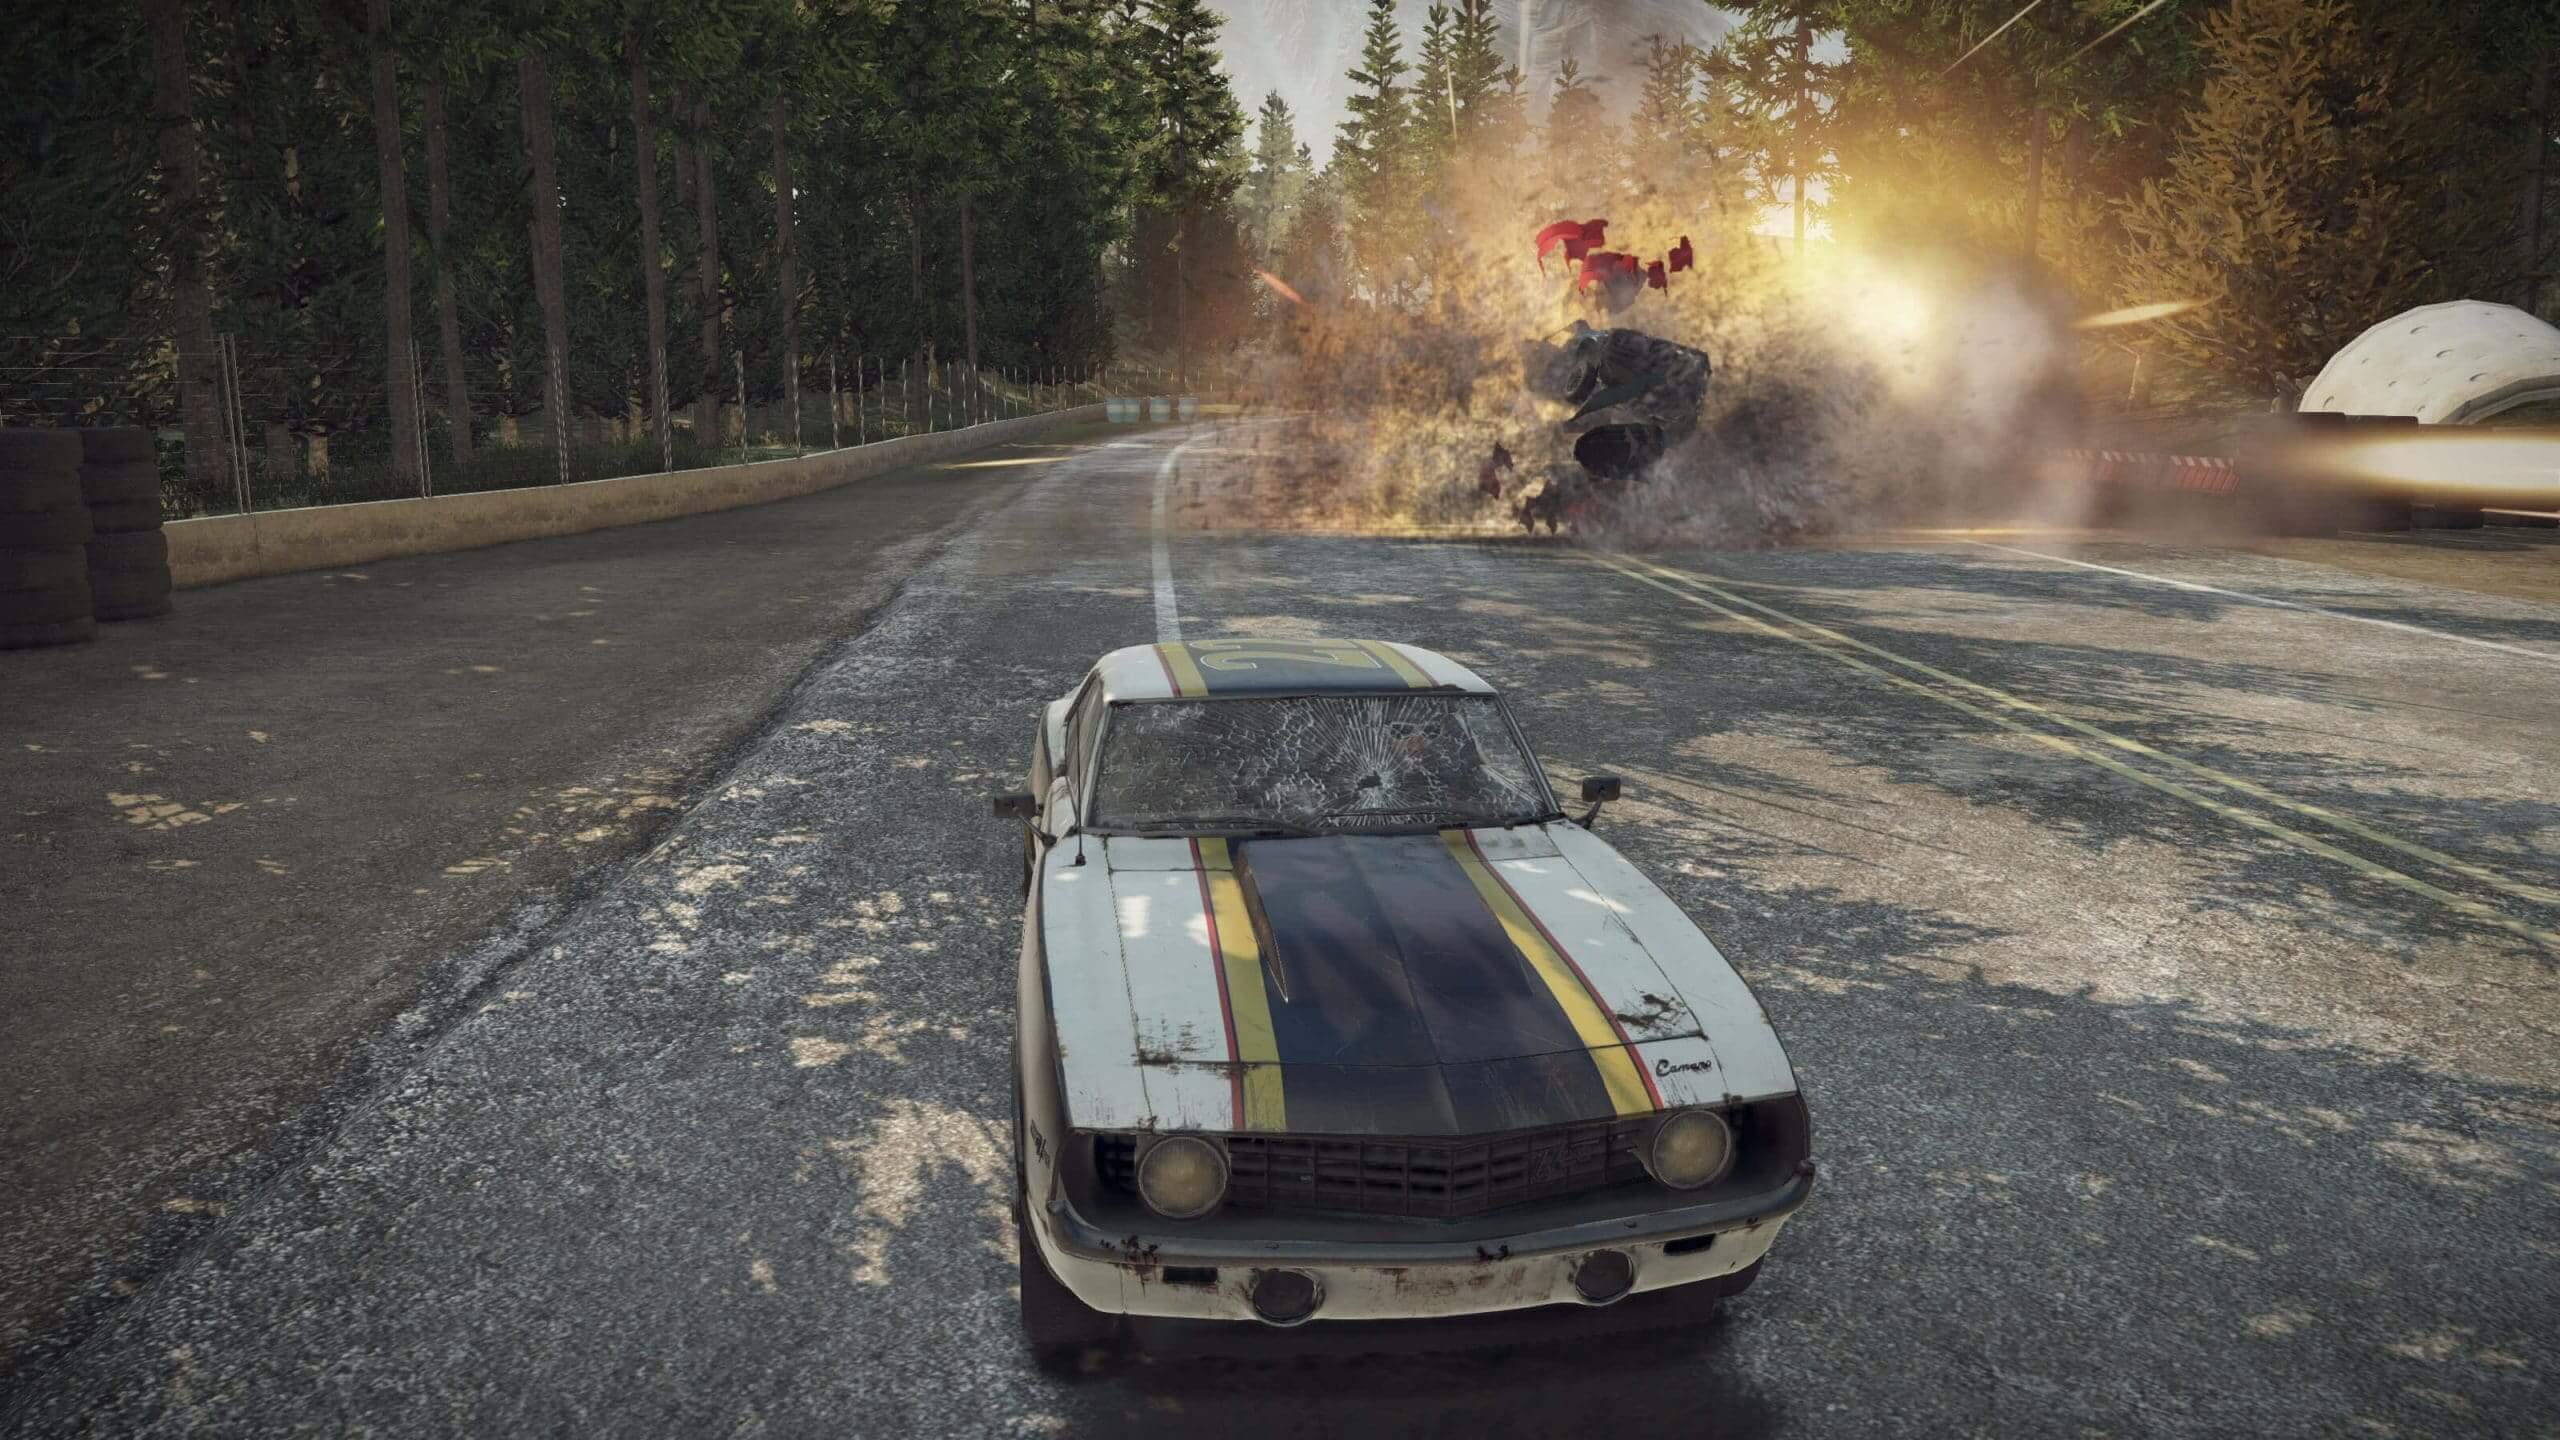 FlatOut 4 Total Insanity download free